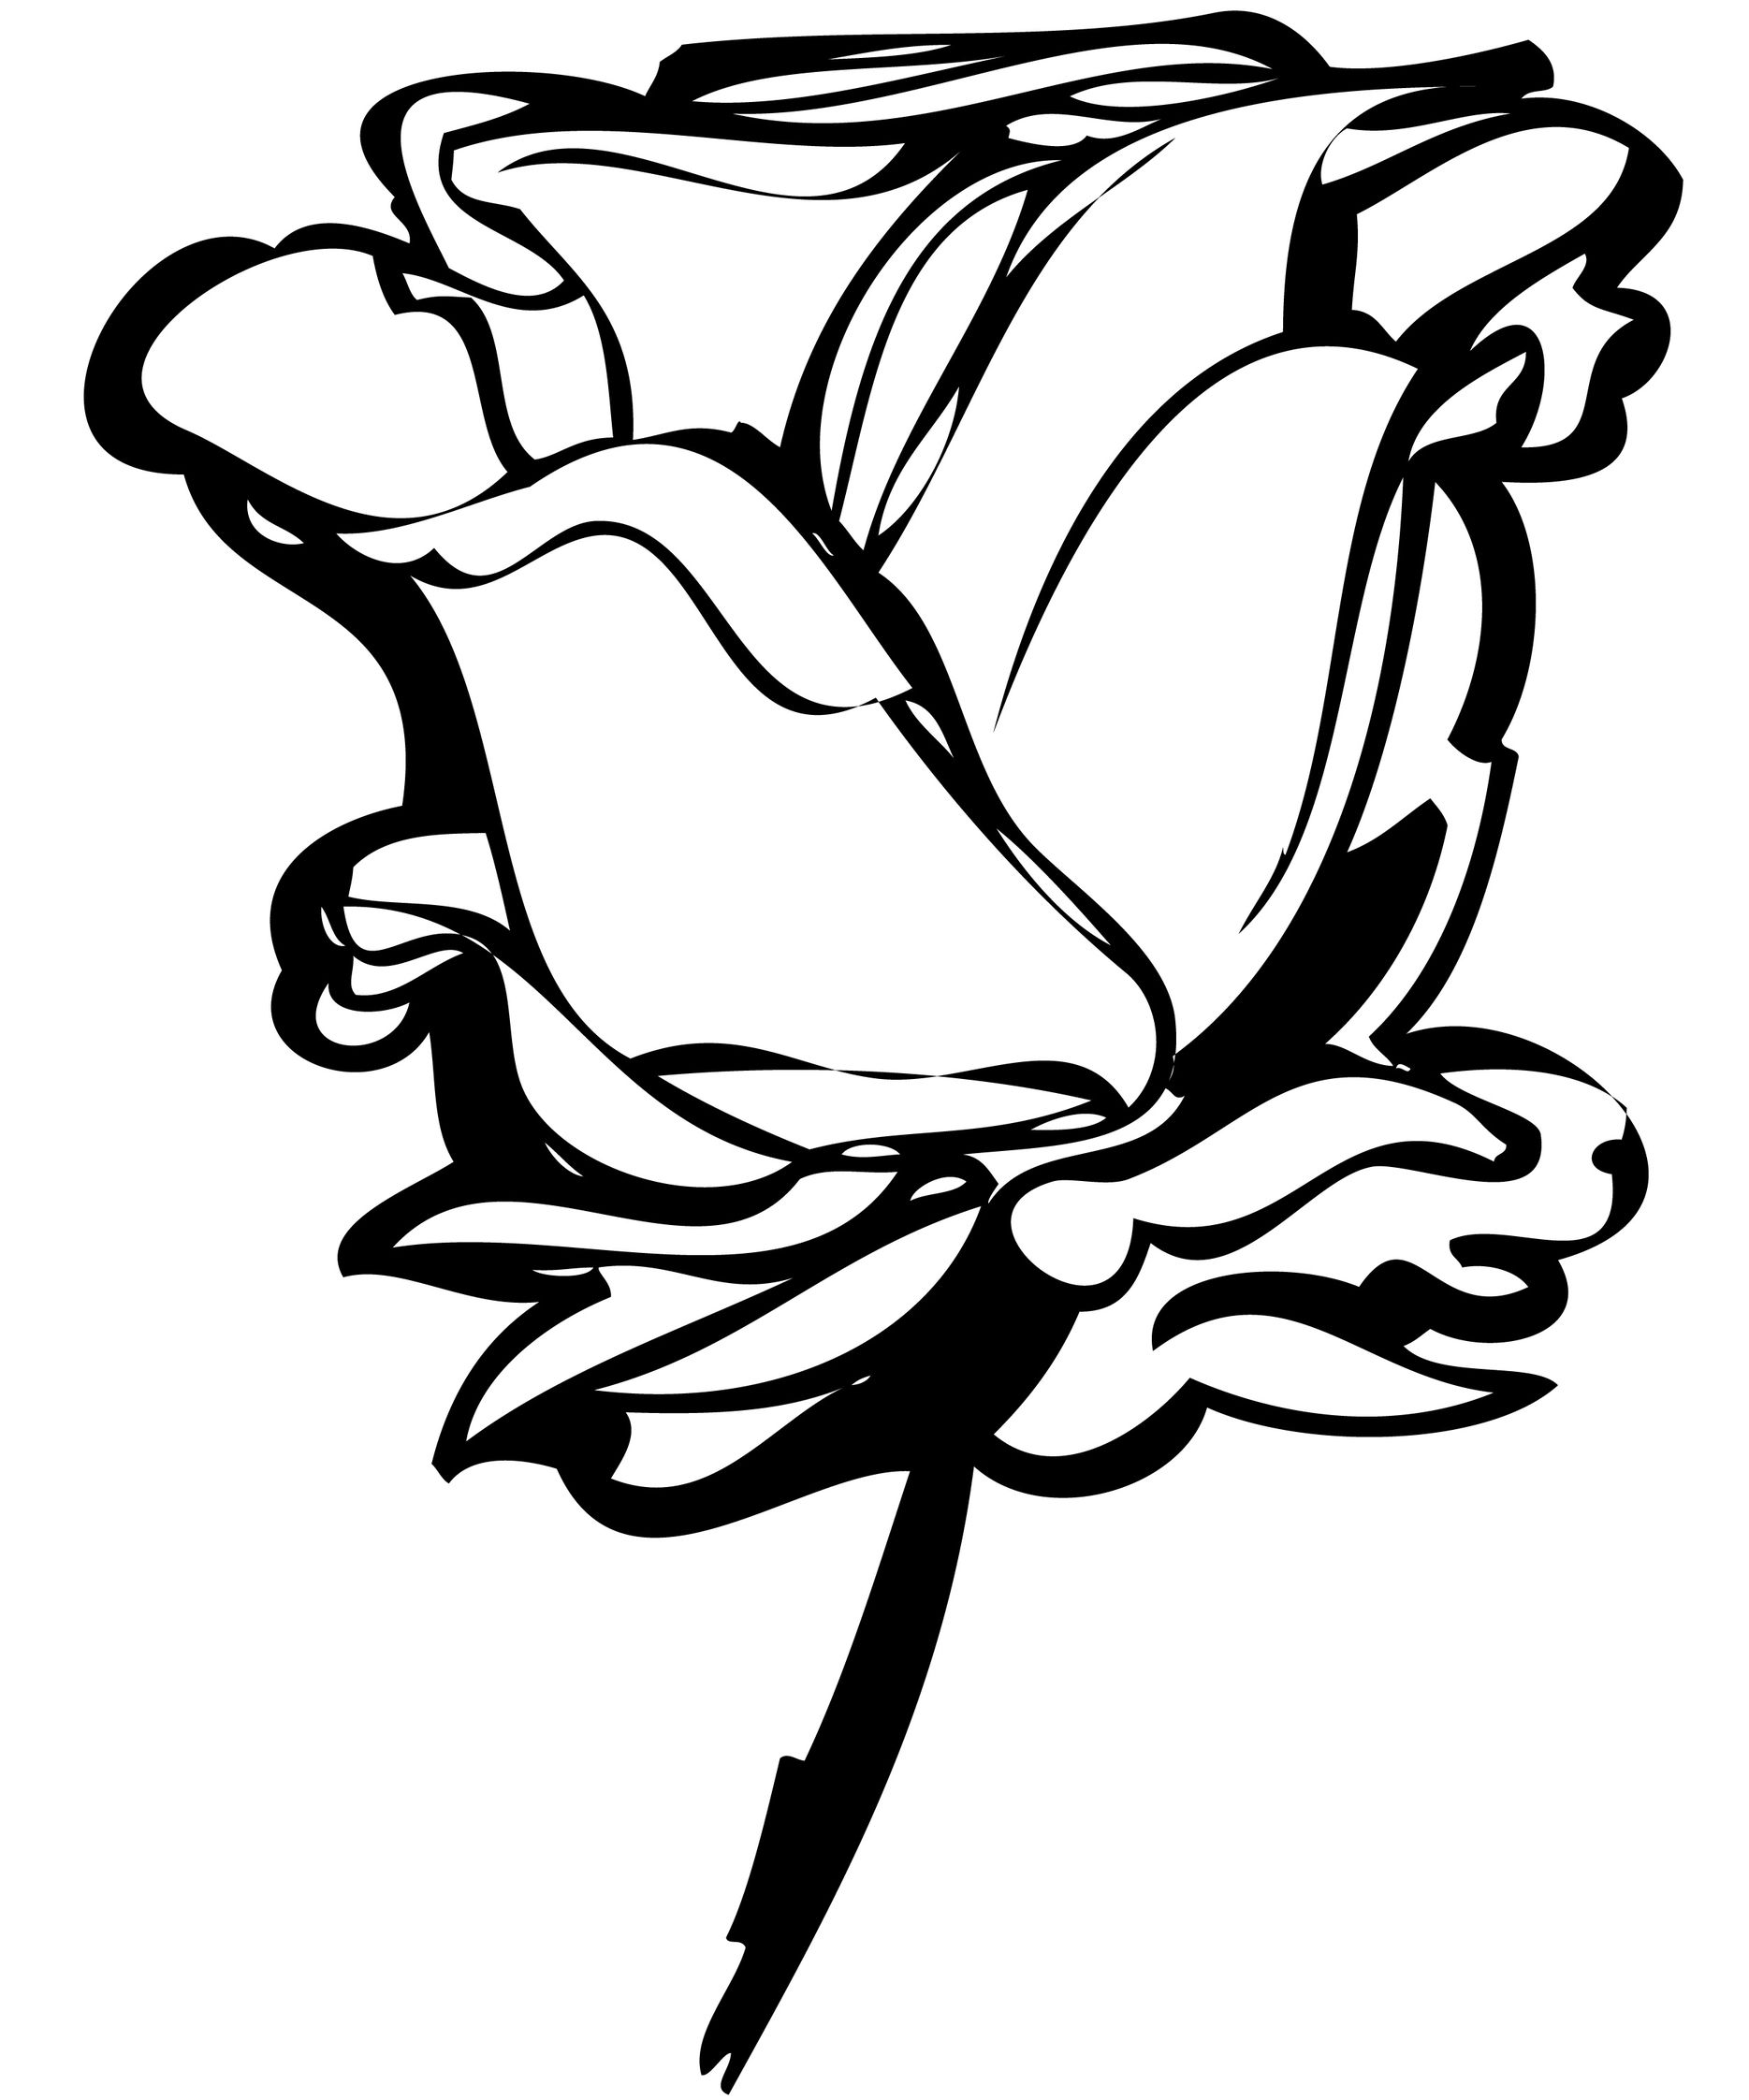 Black And White Rose Drawings - ClipArt Best